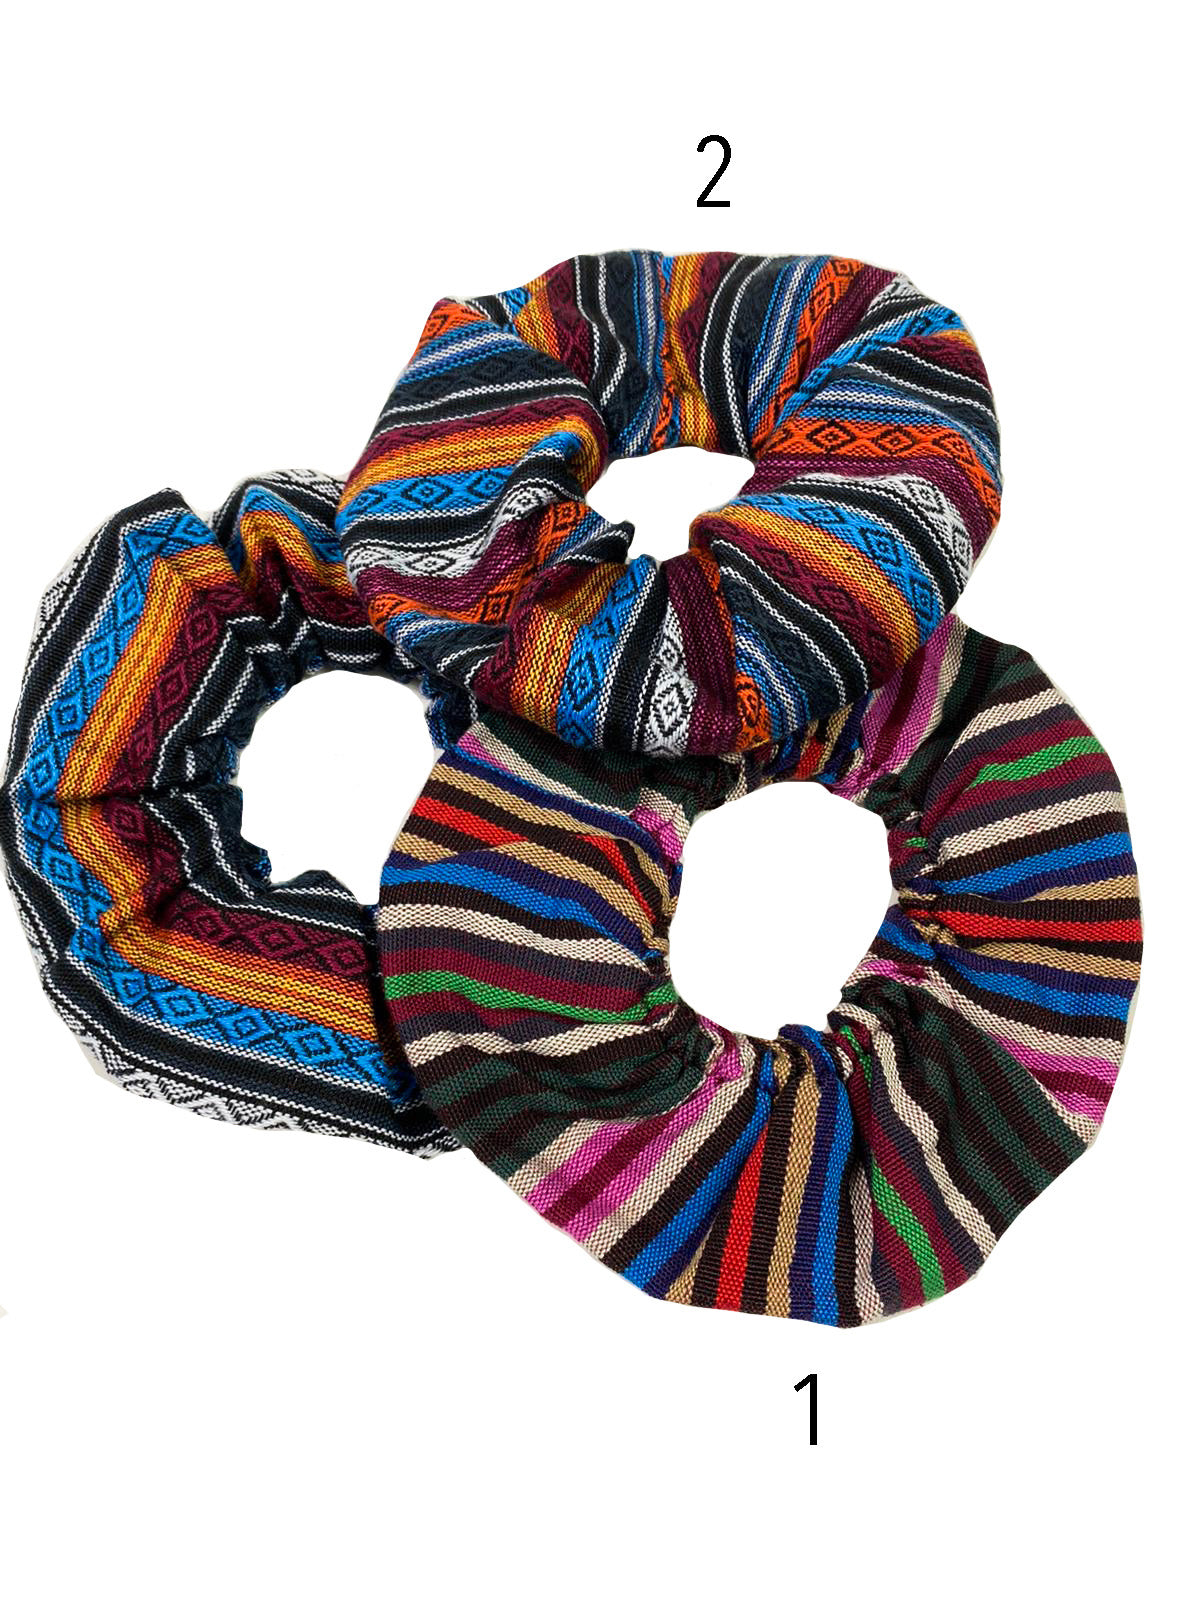 Handmade Hair Scrunchies Hair Bands Scrunchy Hair Ties . Handmade in Guatemala. Great for women's and girls for all ages. Handwoven Intricate Fabric Available in 3 different styles.